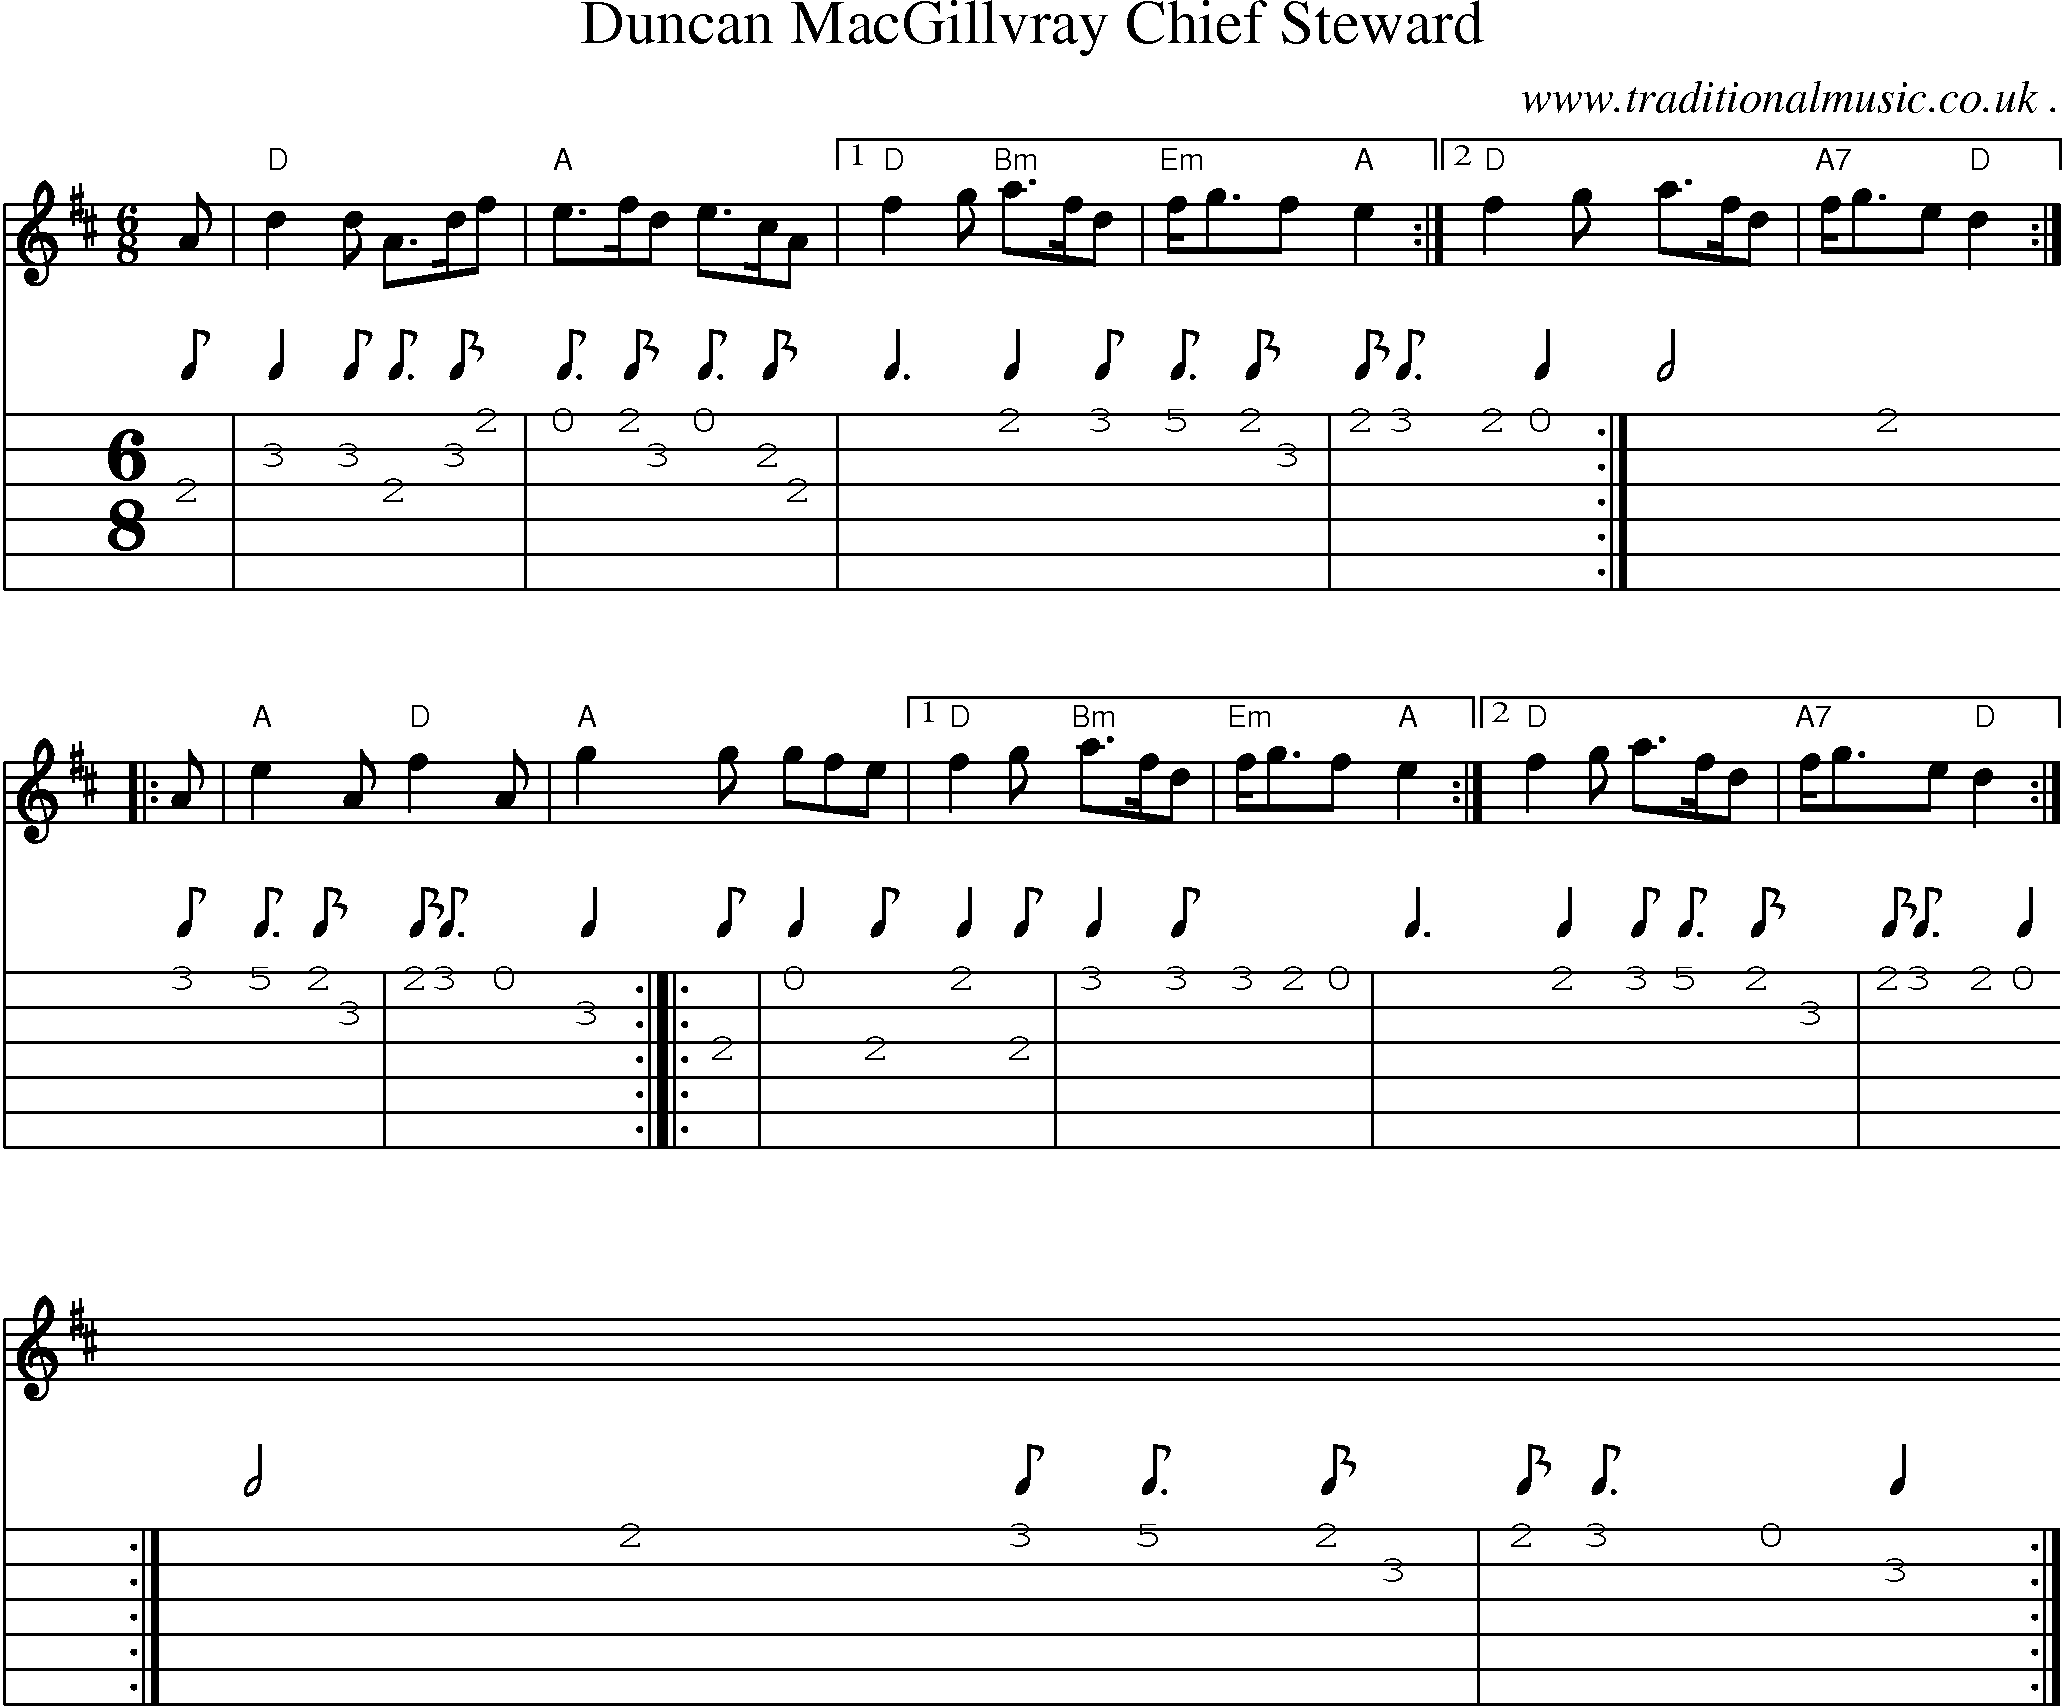 Sheet-music  score, Chords and Guitar Tabs for Duncan Macgillvray Chief Steward